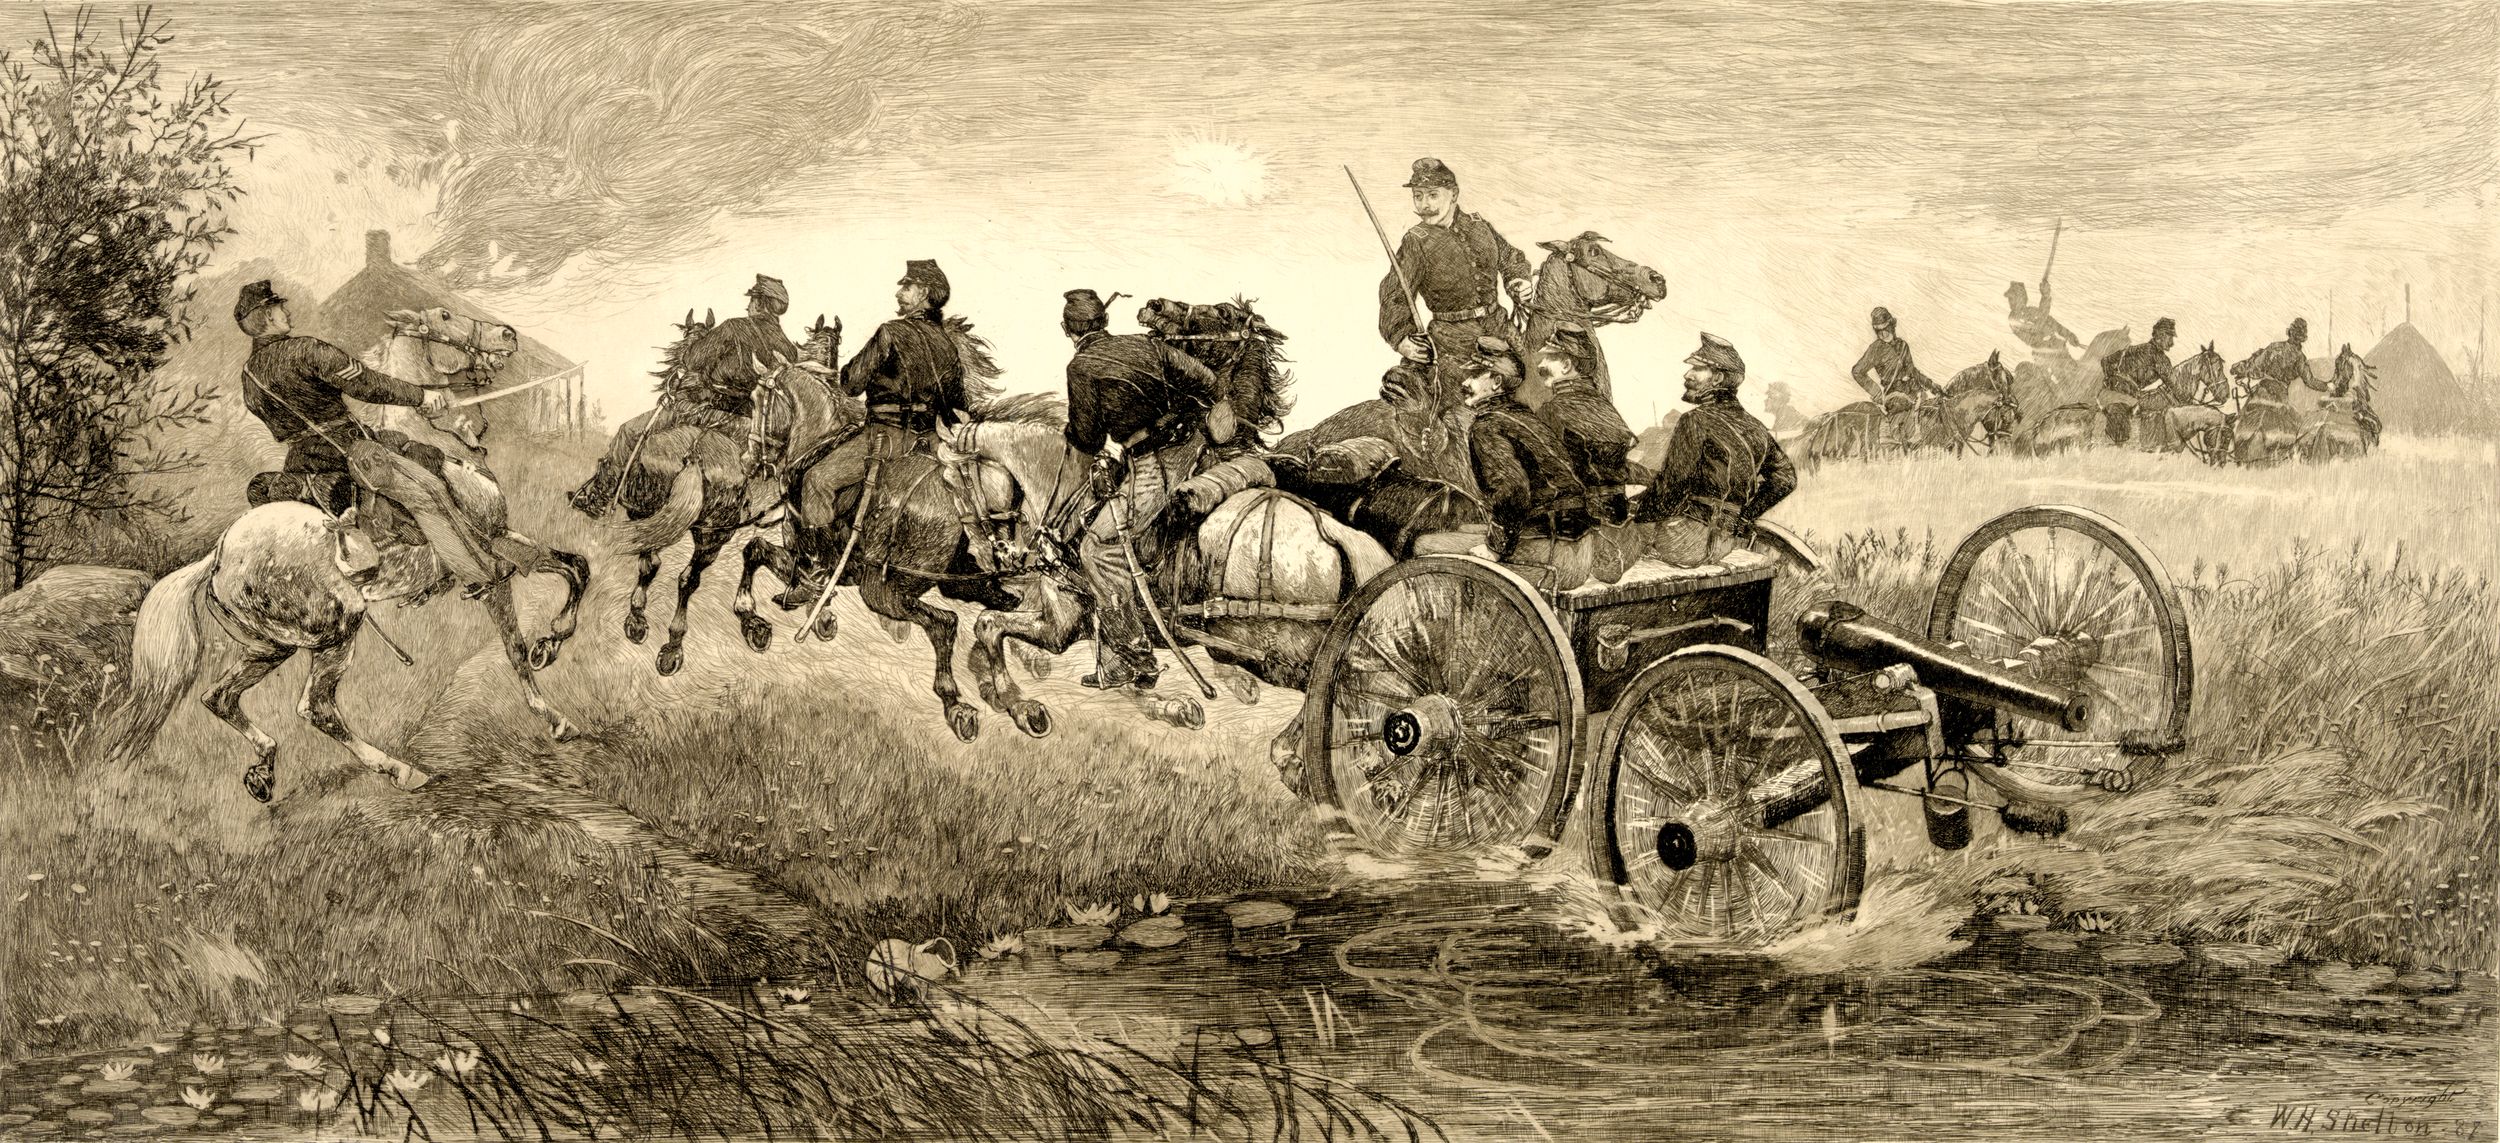 Union cavalry and horse artillery troops race to set up the guns on the next ridge. First Lieutenant Samuel Elder was commended for the work of his 4th U.S. Artillery, Battery E, (four three-inch ordnance rifles) that covered the Union retreat of Colonel Nathaniel Richmond back to Boonsboro following the Battle of Hagerstown. “Too much credit cannot be given to Lieutenant Elder,” Richmond said. The “men of his battery are also deserving of special mention for their bravery and good conduct under fire.”